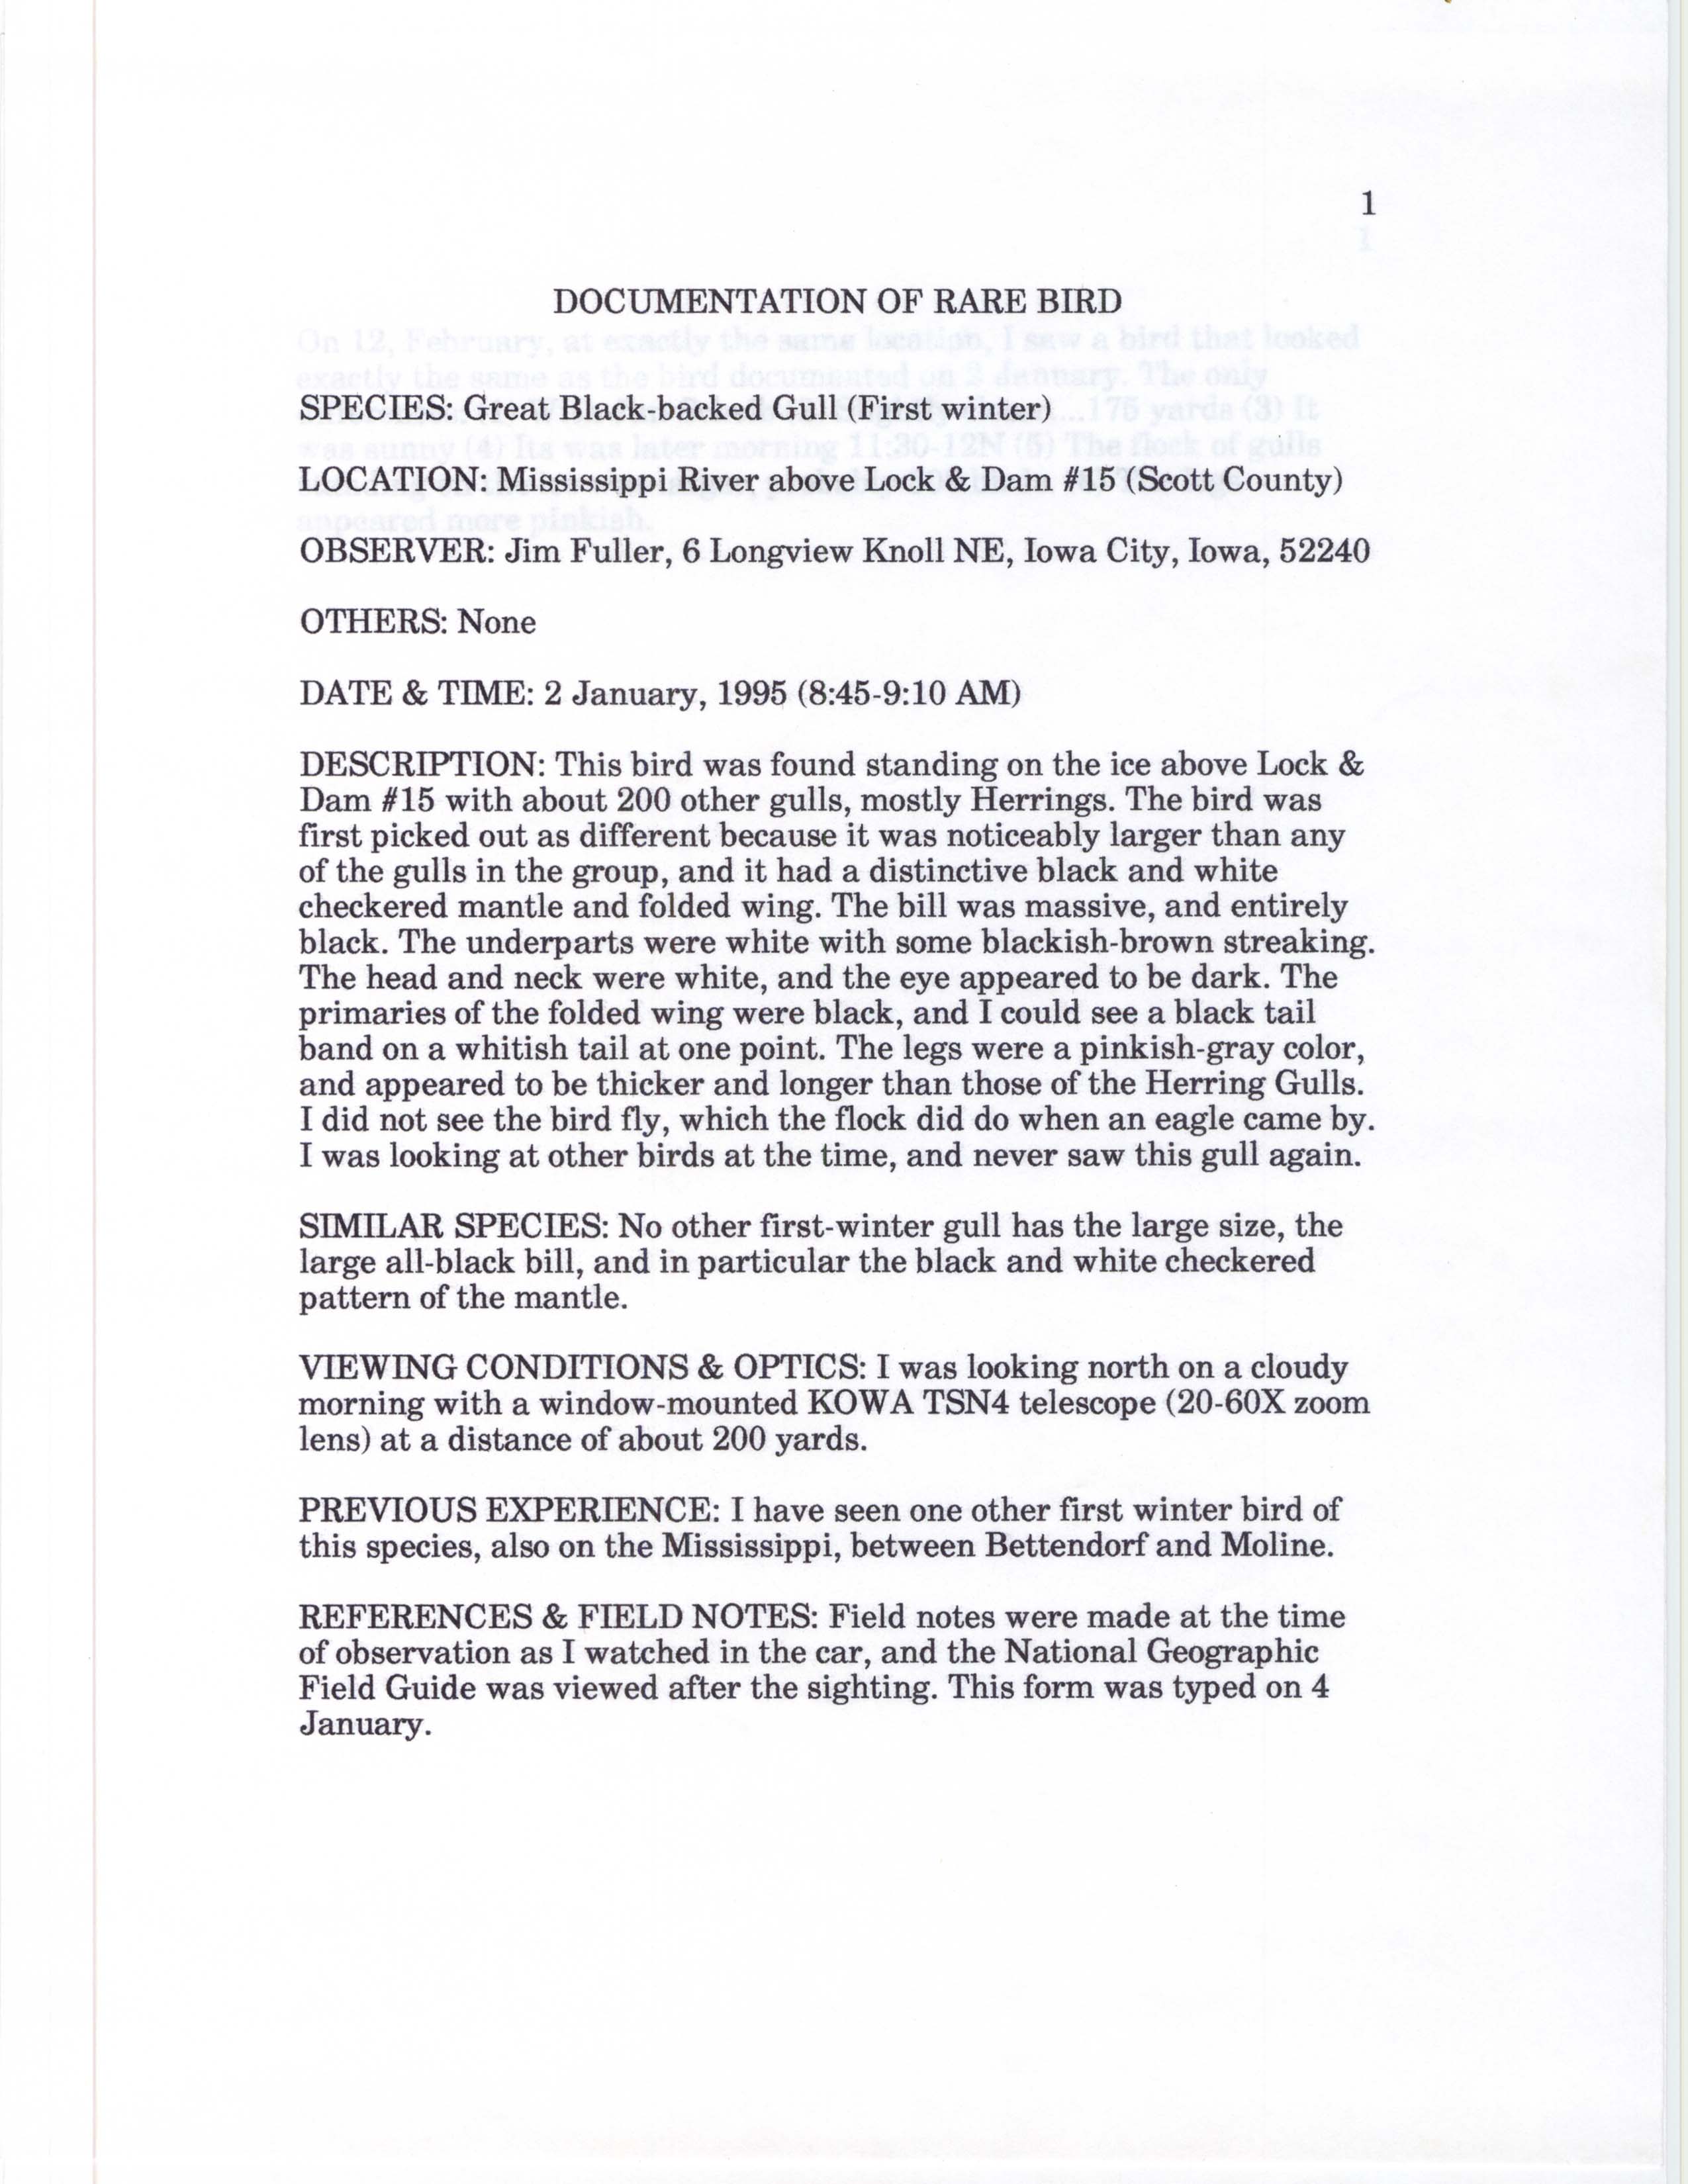 Rare bird documentation form for Great Black-backed Gull at Lock and Dam 15, 1995